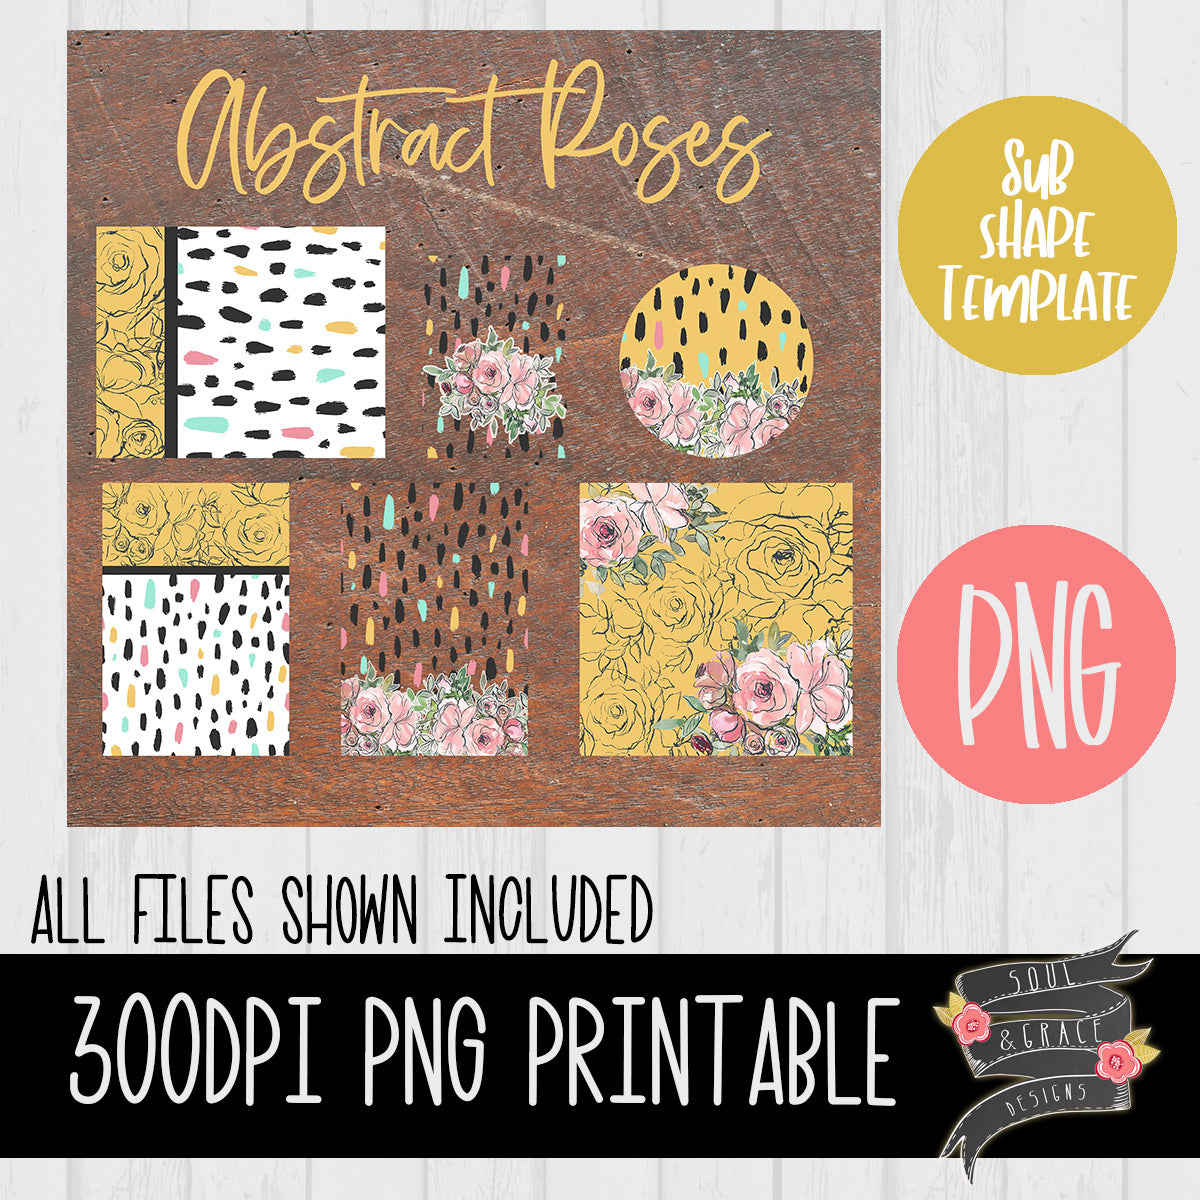 Abstract Roses Sublimation Template Set